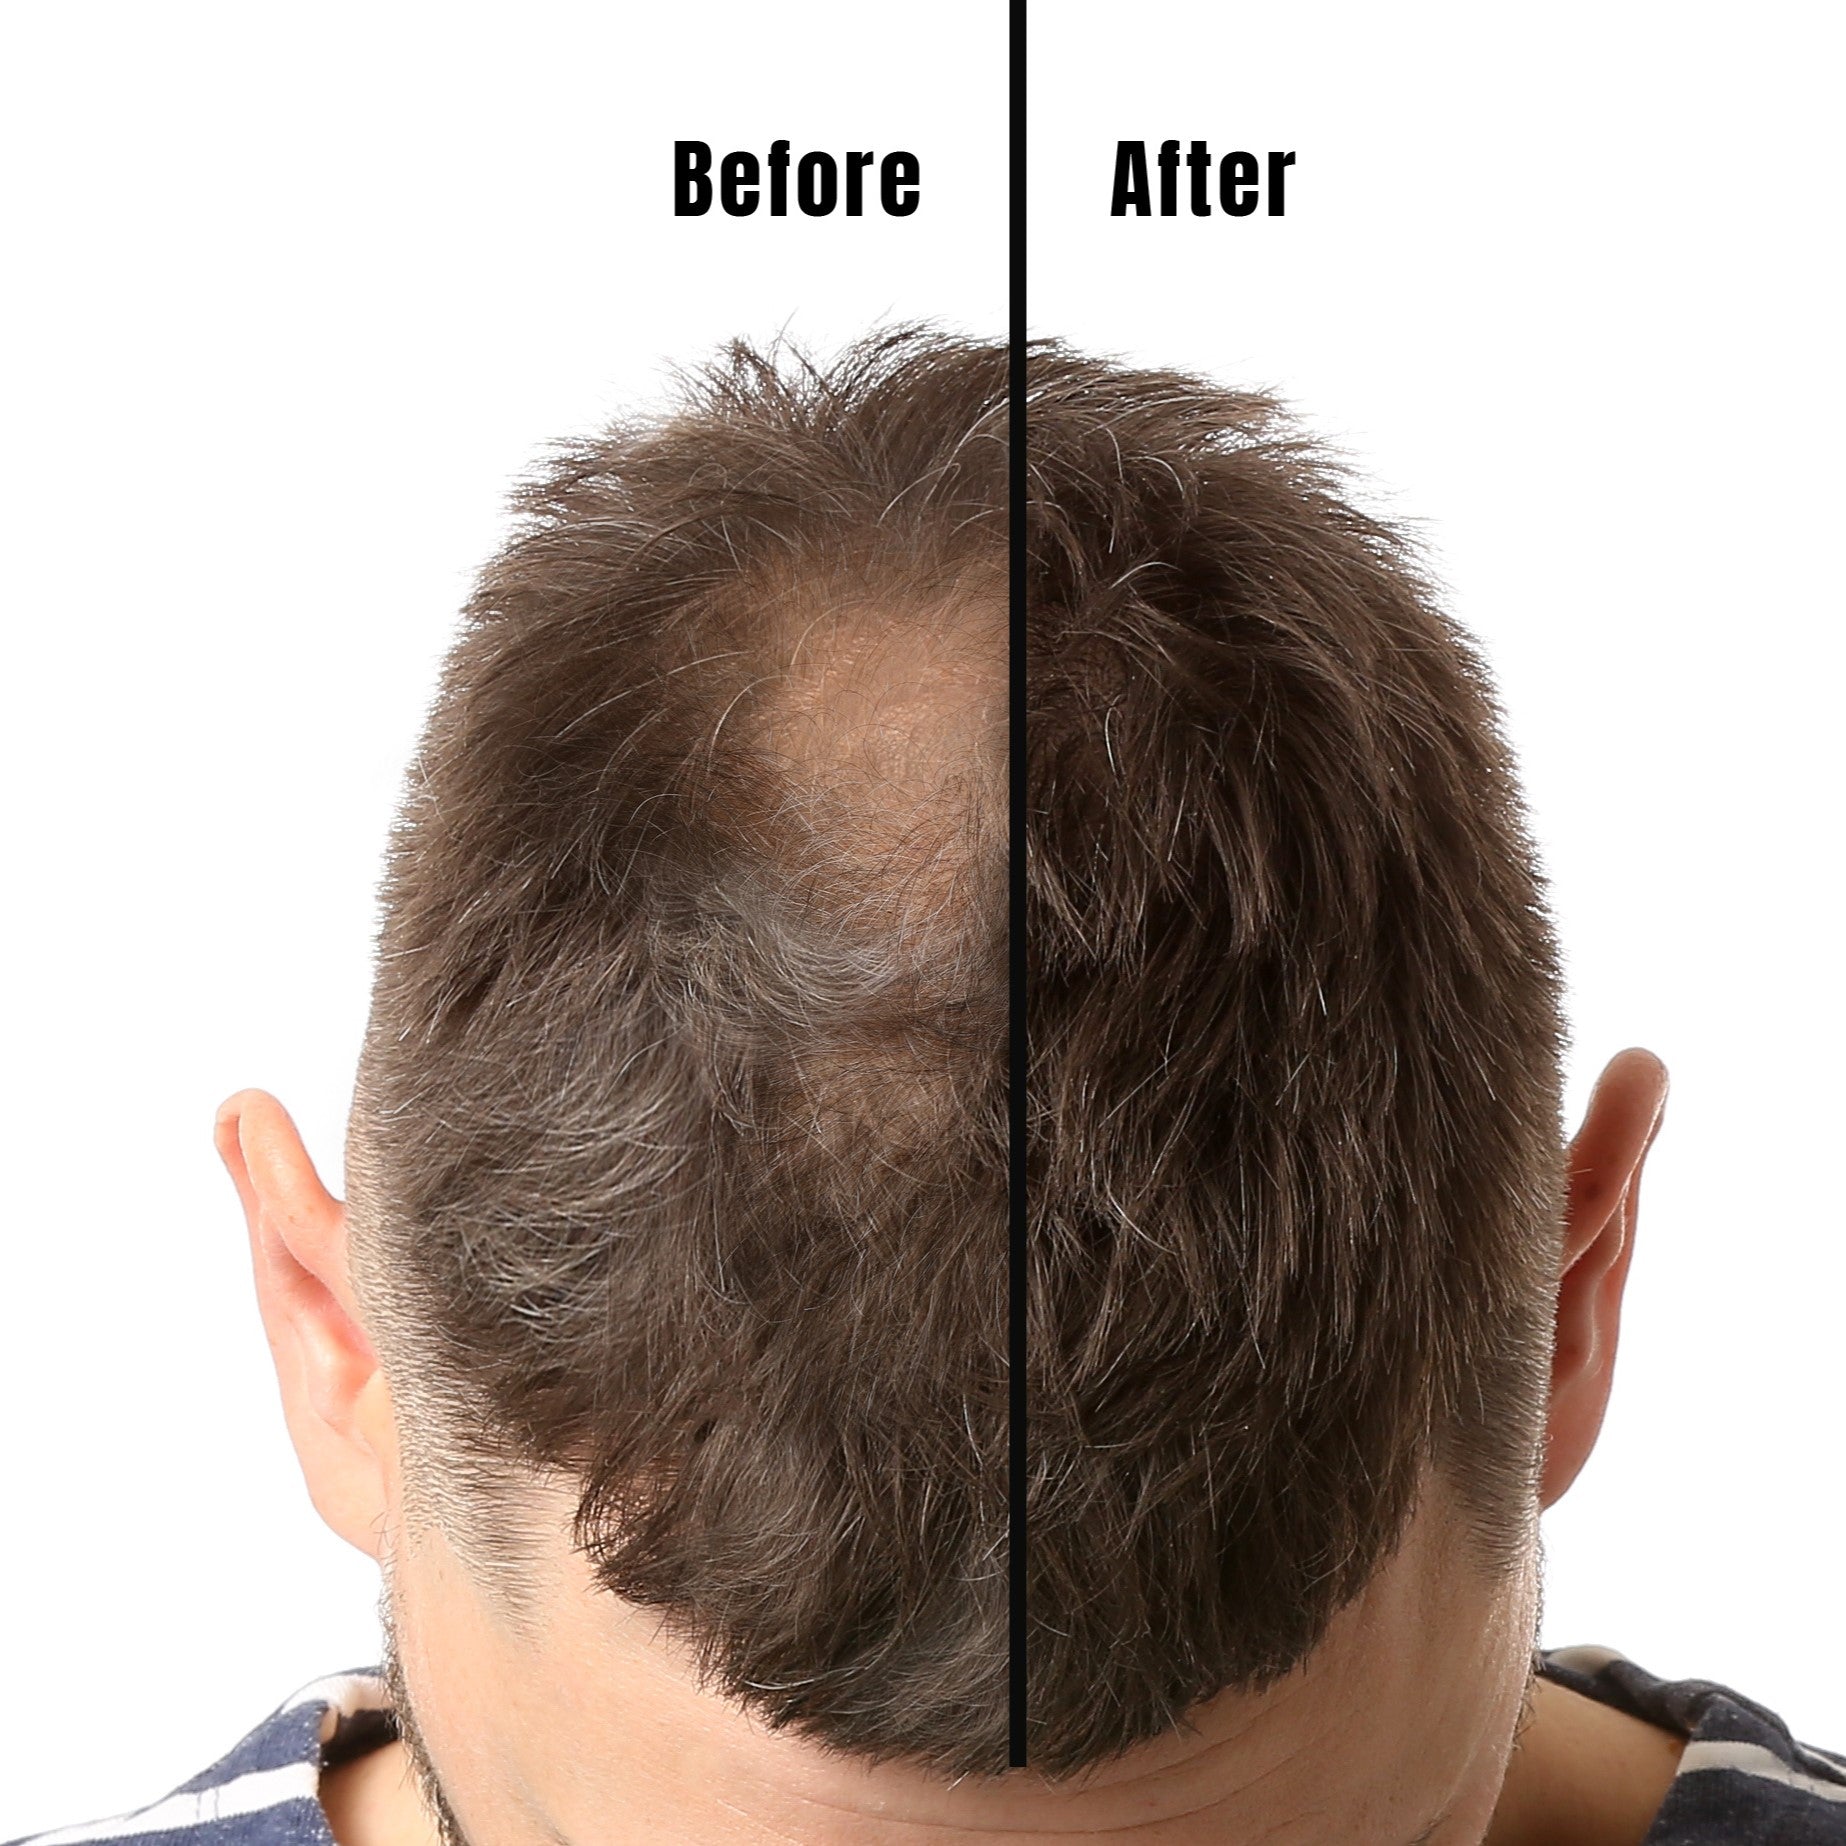 forråde Neuropati Muskuløs Results From Minoxidil: Before And After Pictures